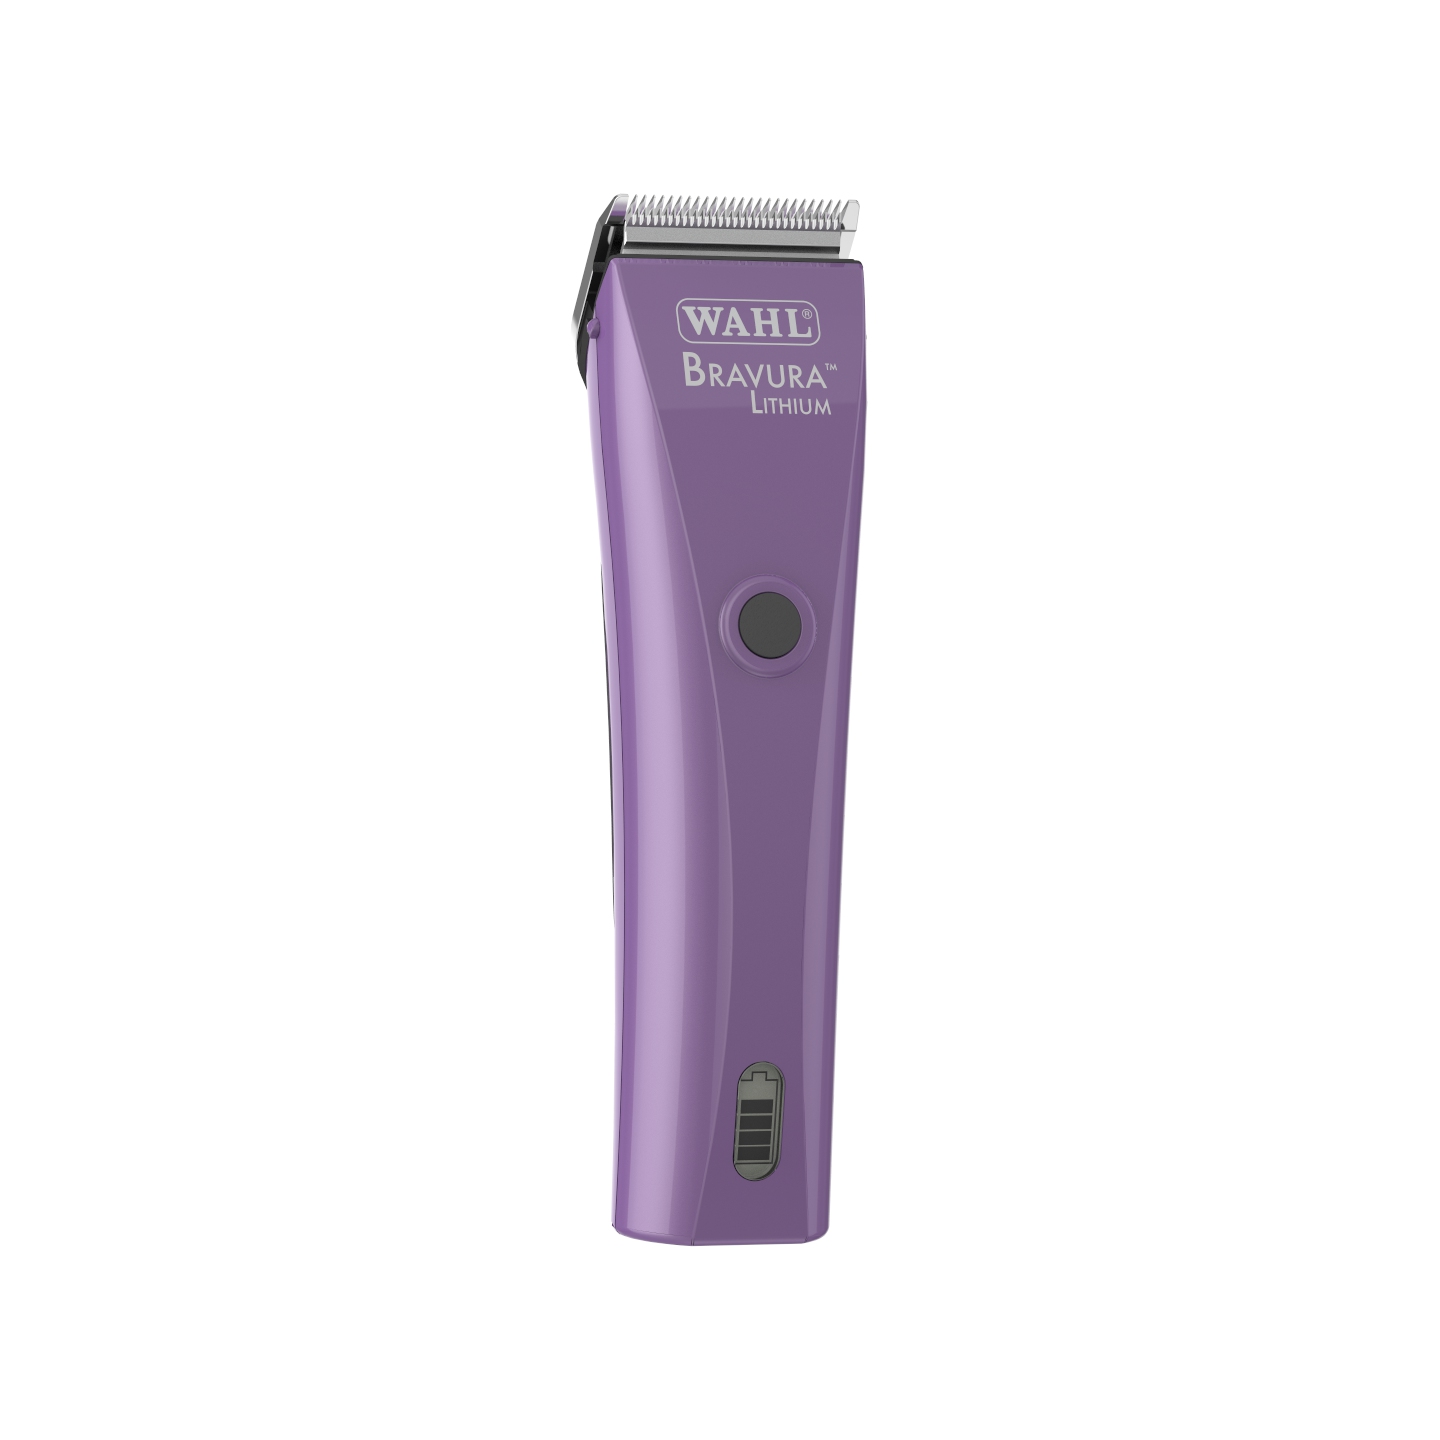 wahl bravura lithium clippers